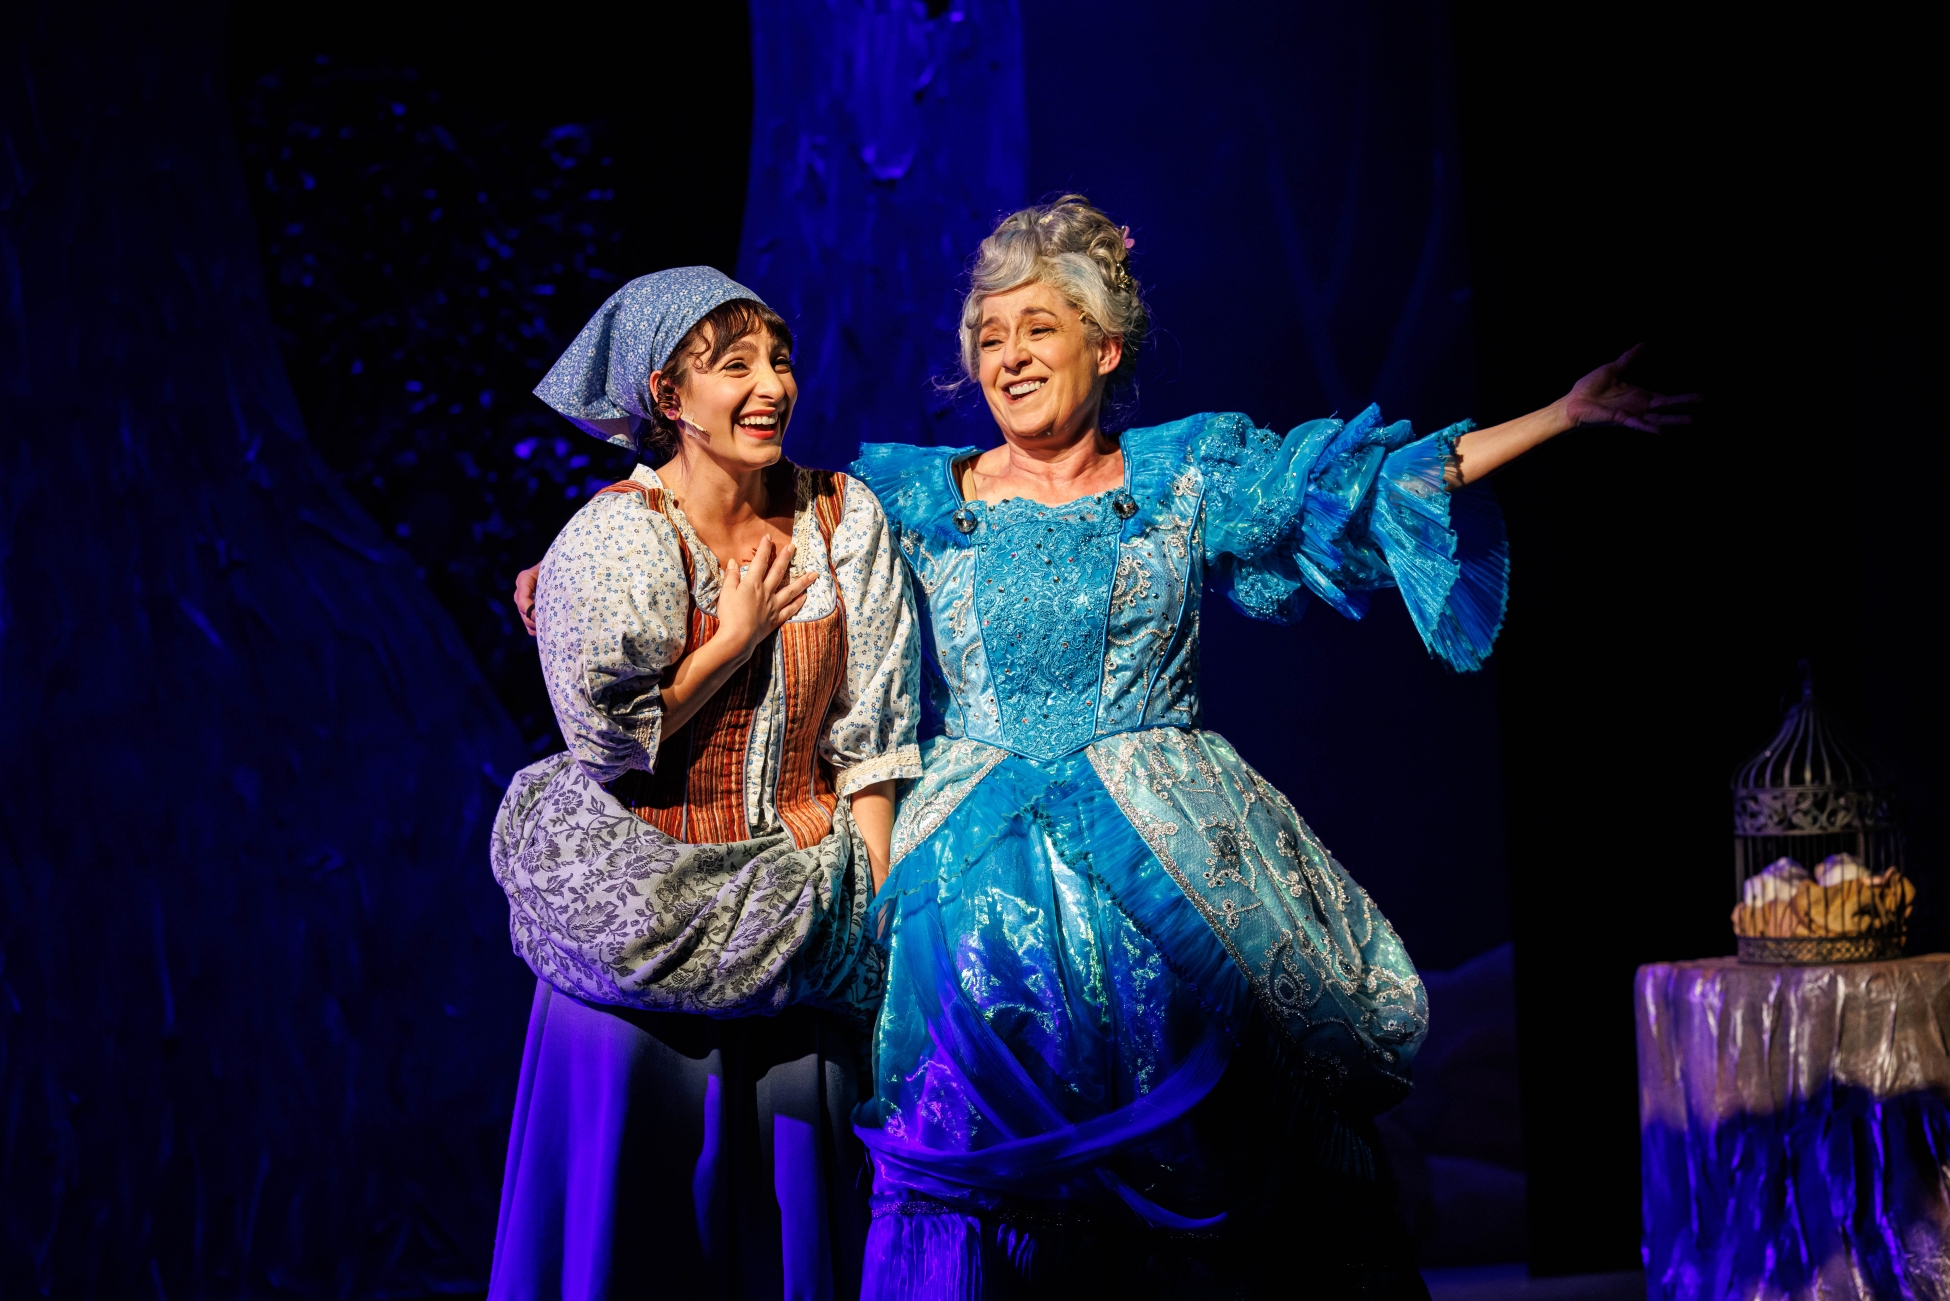 Tyhe fairy godmother reveals herself to Cinderella.